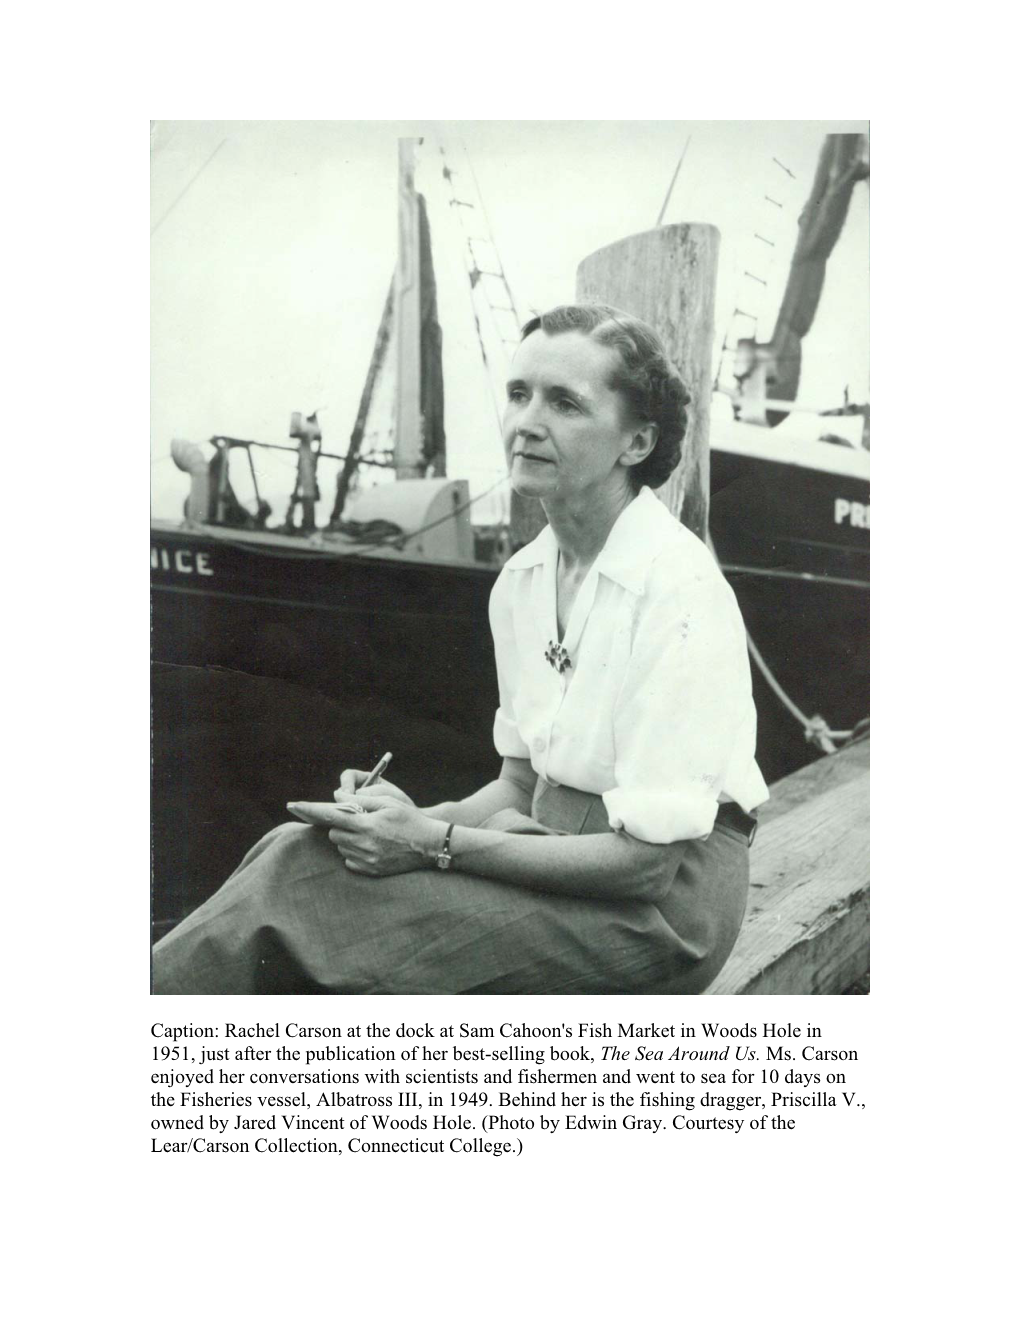 Caption: Rachel Carson at the Dock at Sam Cahoon's Fish Market in Woods Hole in 1951, Just After the Publication of Her Best-Selling Book, the Sea Around Us